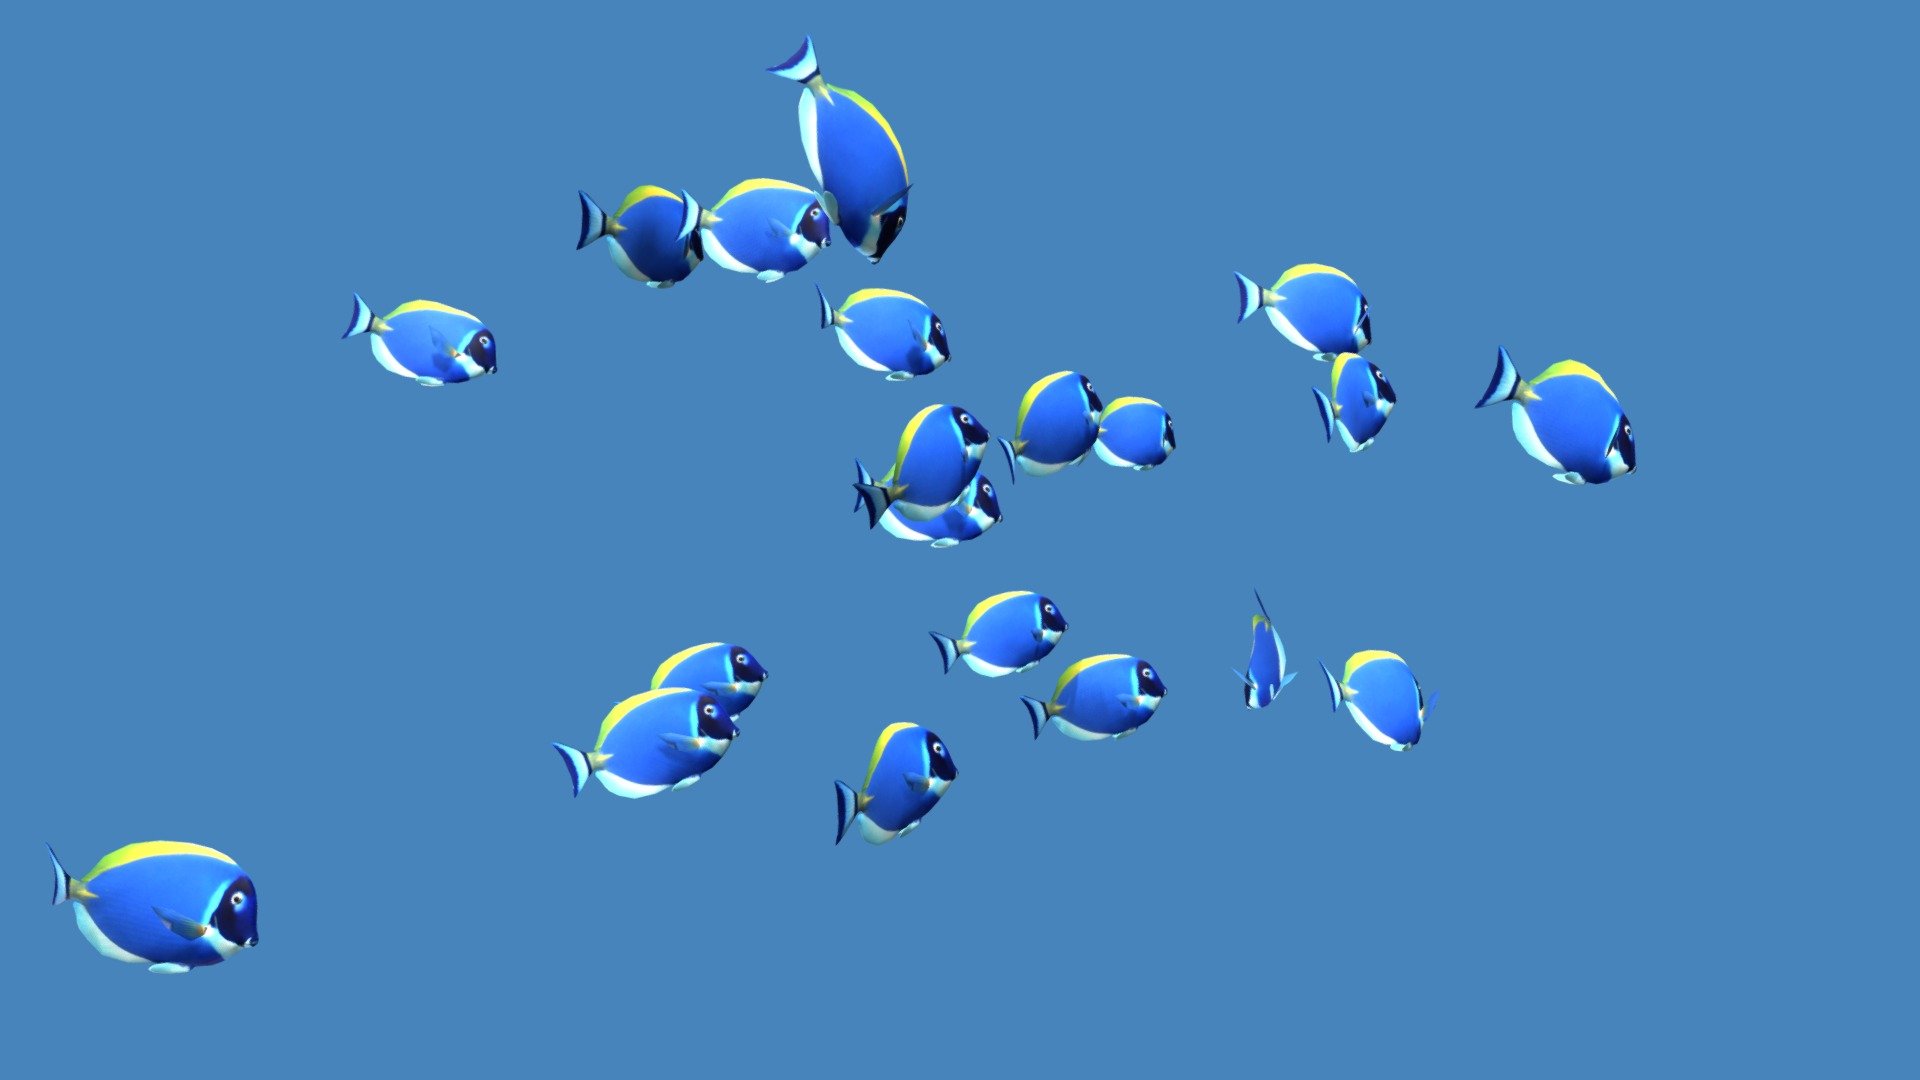 Before purchasing this model, you can free download Emperor Angelfish and try to import it. 



Schooling Blue Tangs



20 fish

Loop 30sec. 



Blue and Yellow fish: https://skfb.ly/6UUZo

Only Yellow fish: https://skfb.ly/6UIBZ



Dear Blender Users If you have any problems importing into a Blender, please email me, this problem is solved. To contact me use the link in the top right corner of my main Sketchfab page (LinkedIn or Behance) 3d model